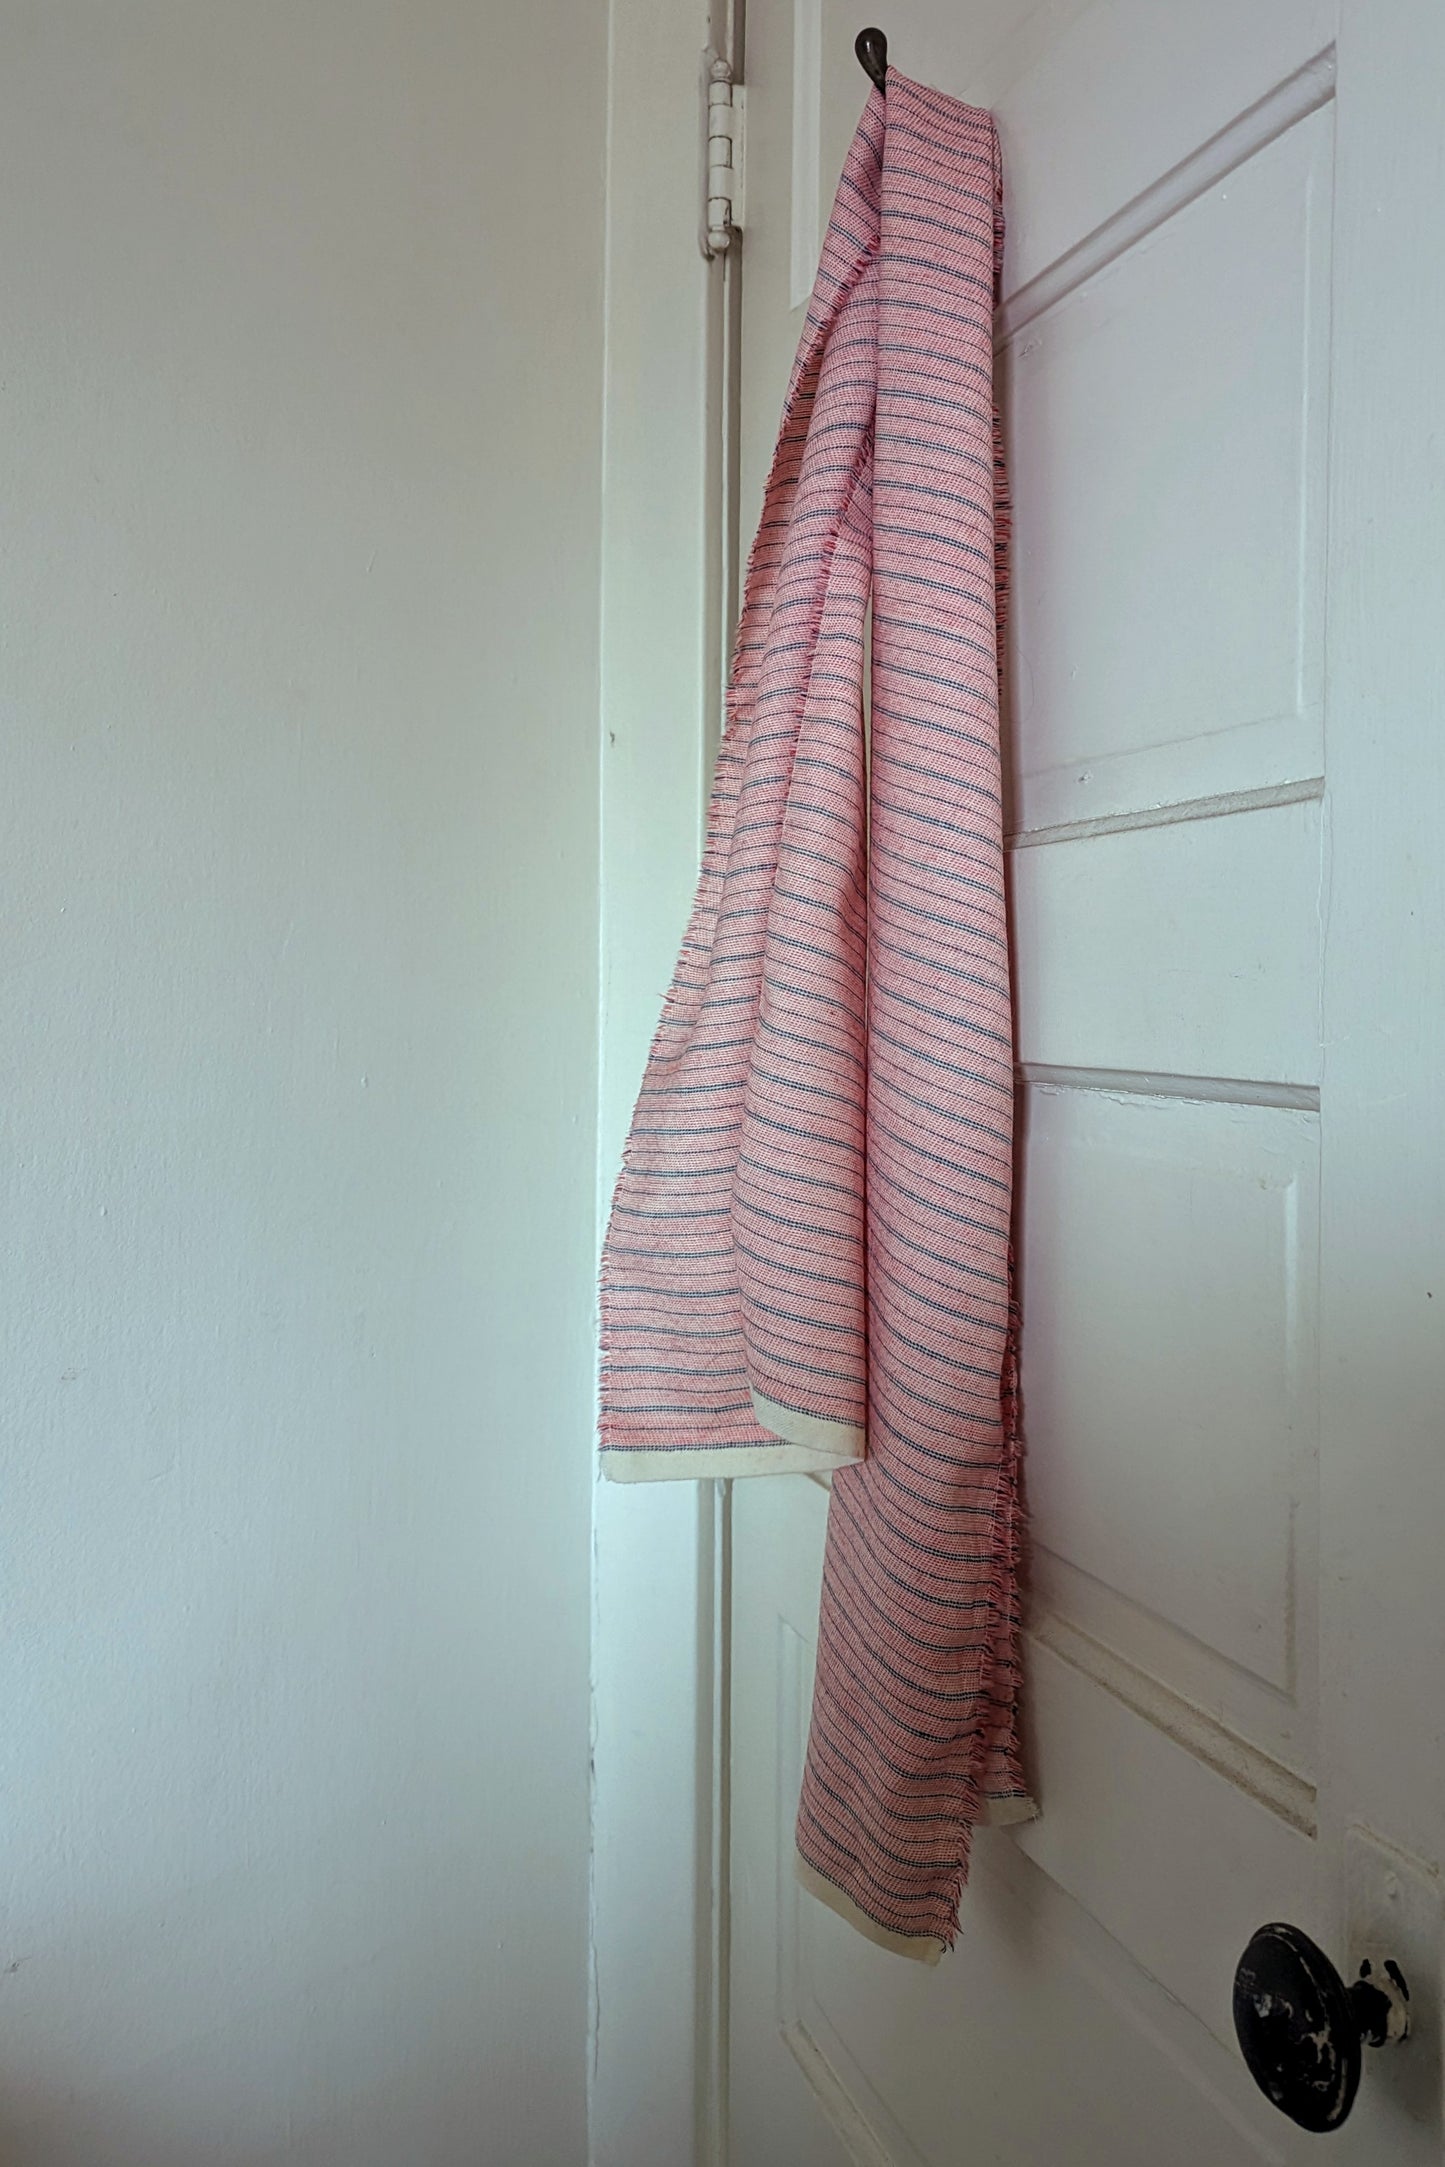 Vintage Striped Wool Scarf (cream, blue, red) by Connally Goods